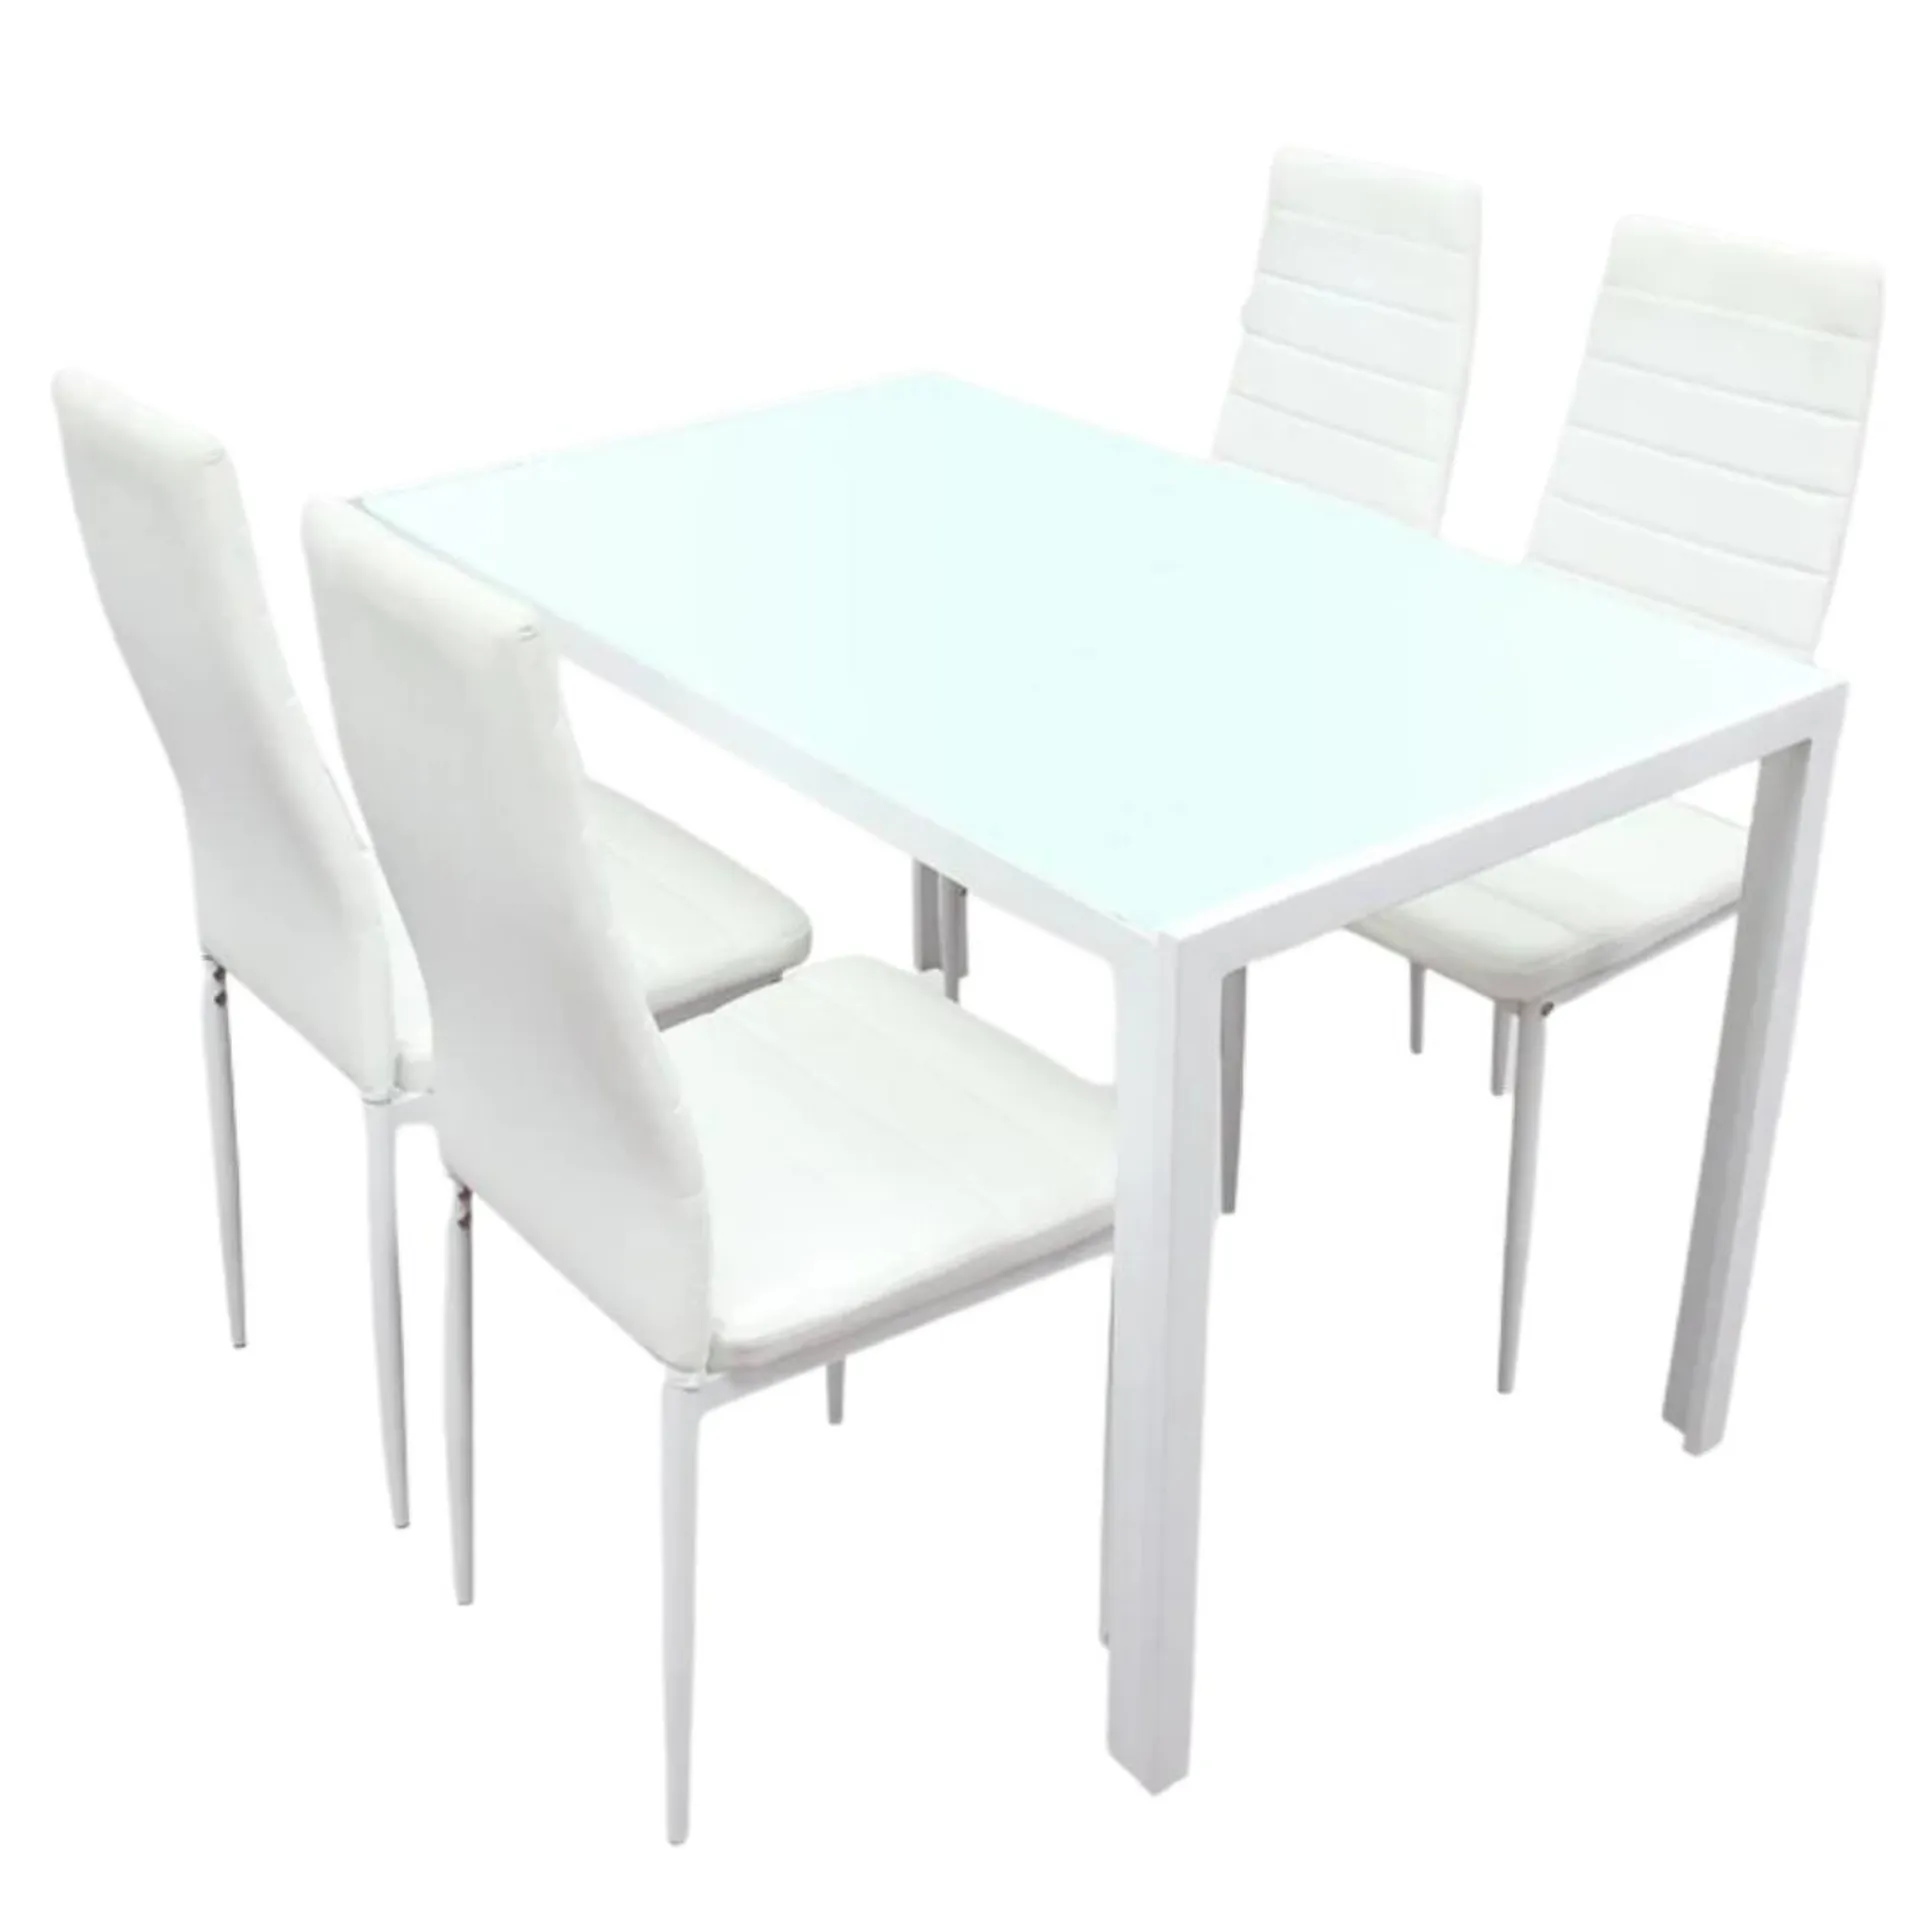 Lewis's 5 Piece Berlin Glass Dining Table & White Faux Leather Chairs Set Kitchen